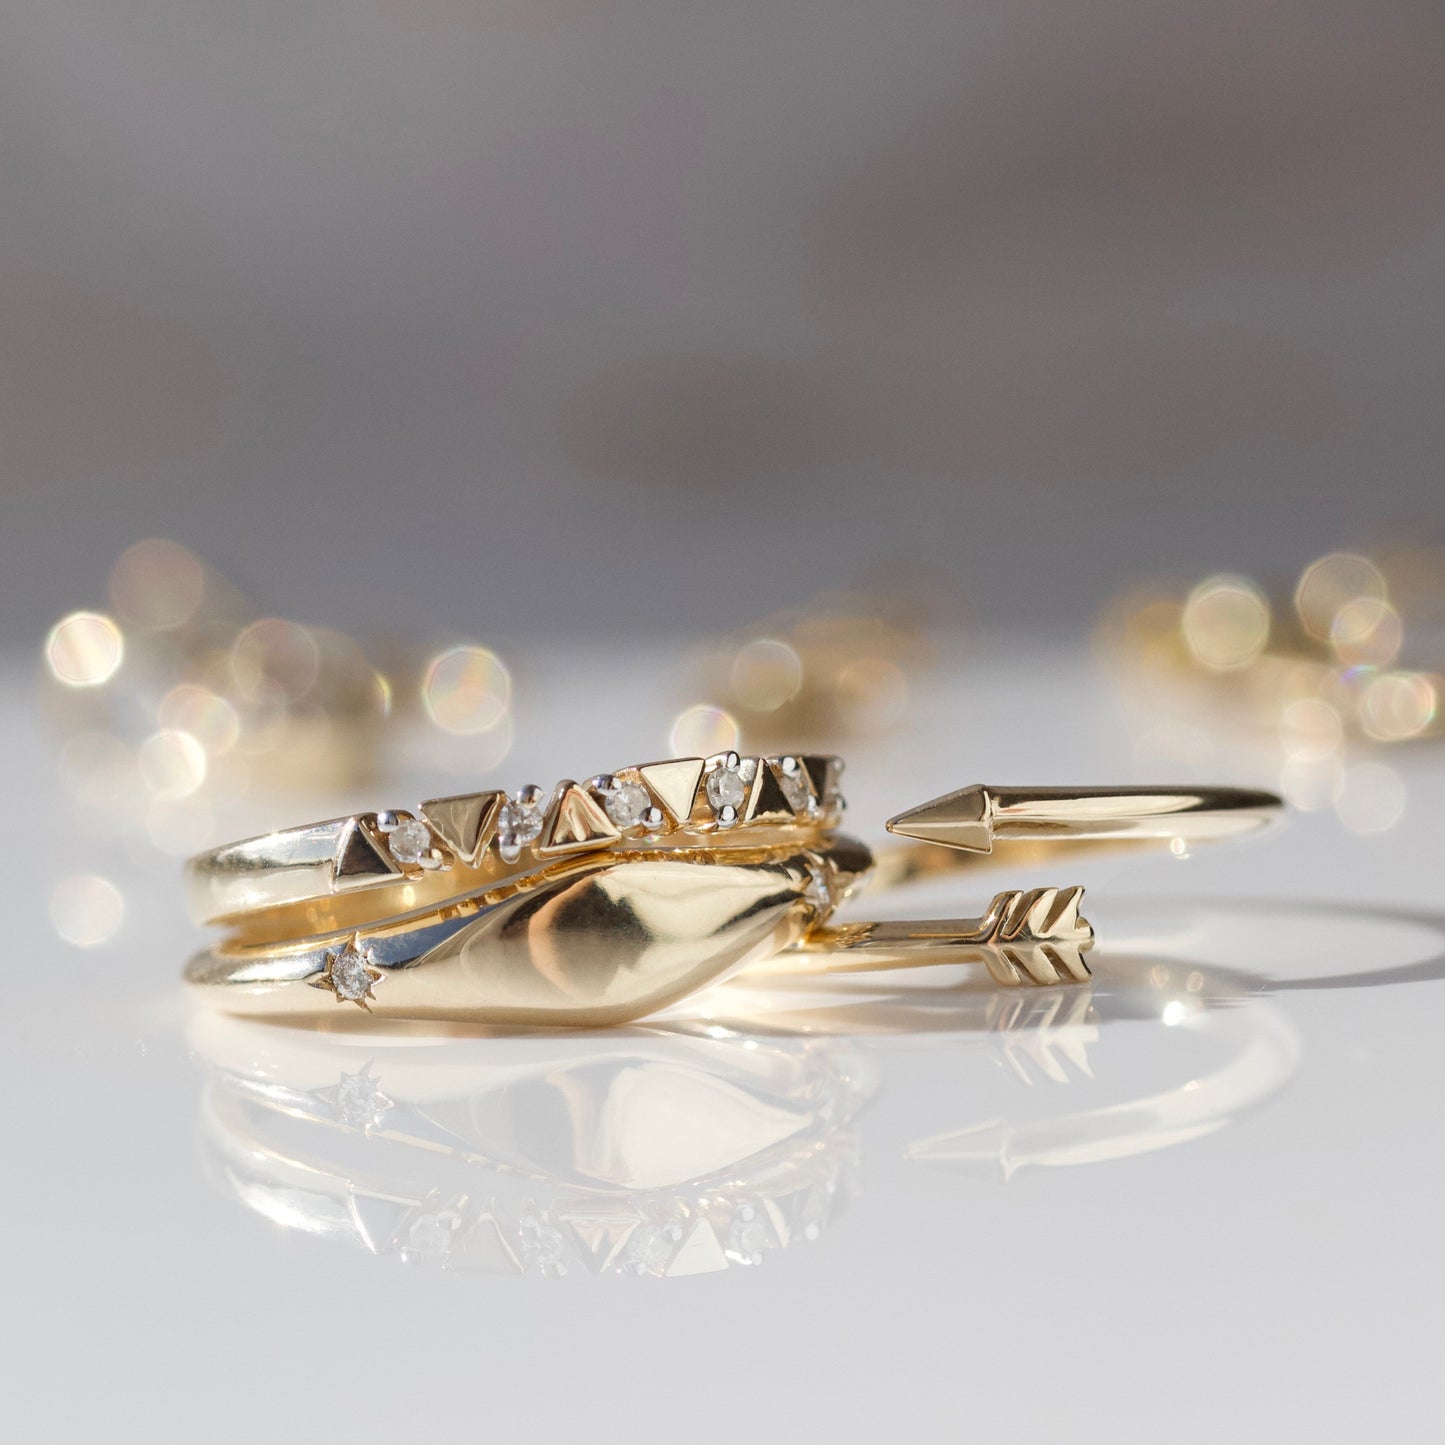 Solid gold cupids arrow ring 